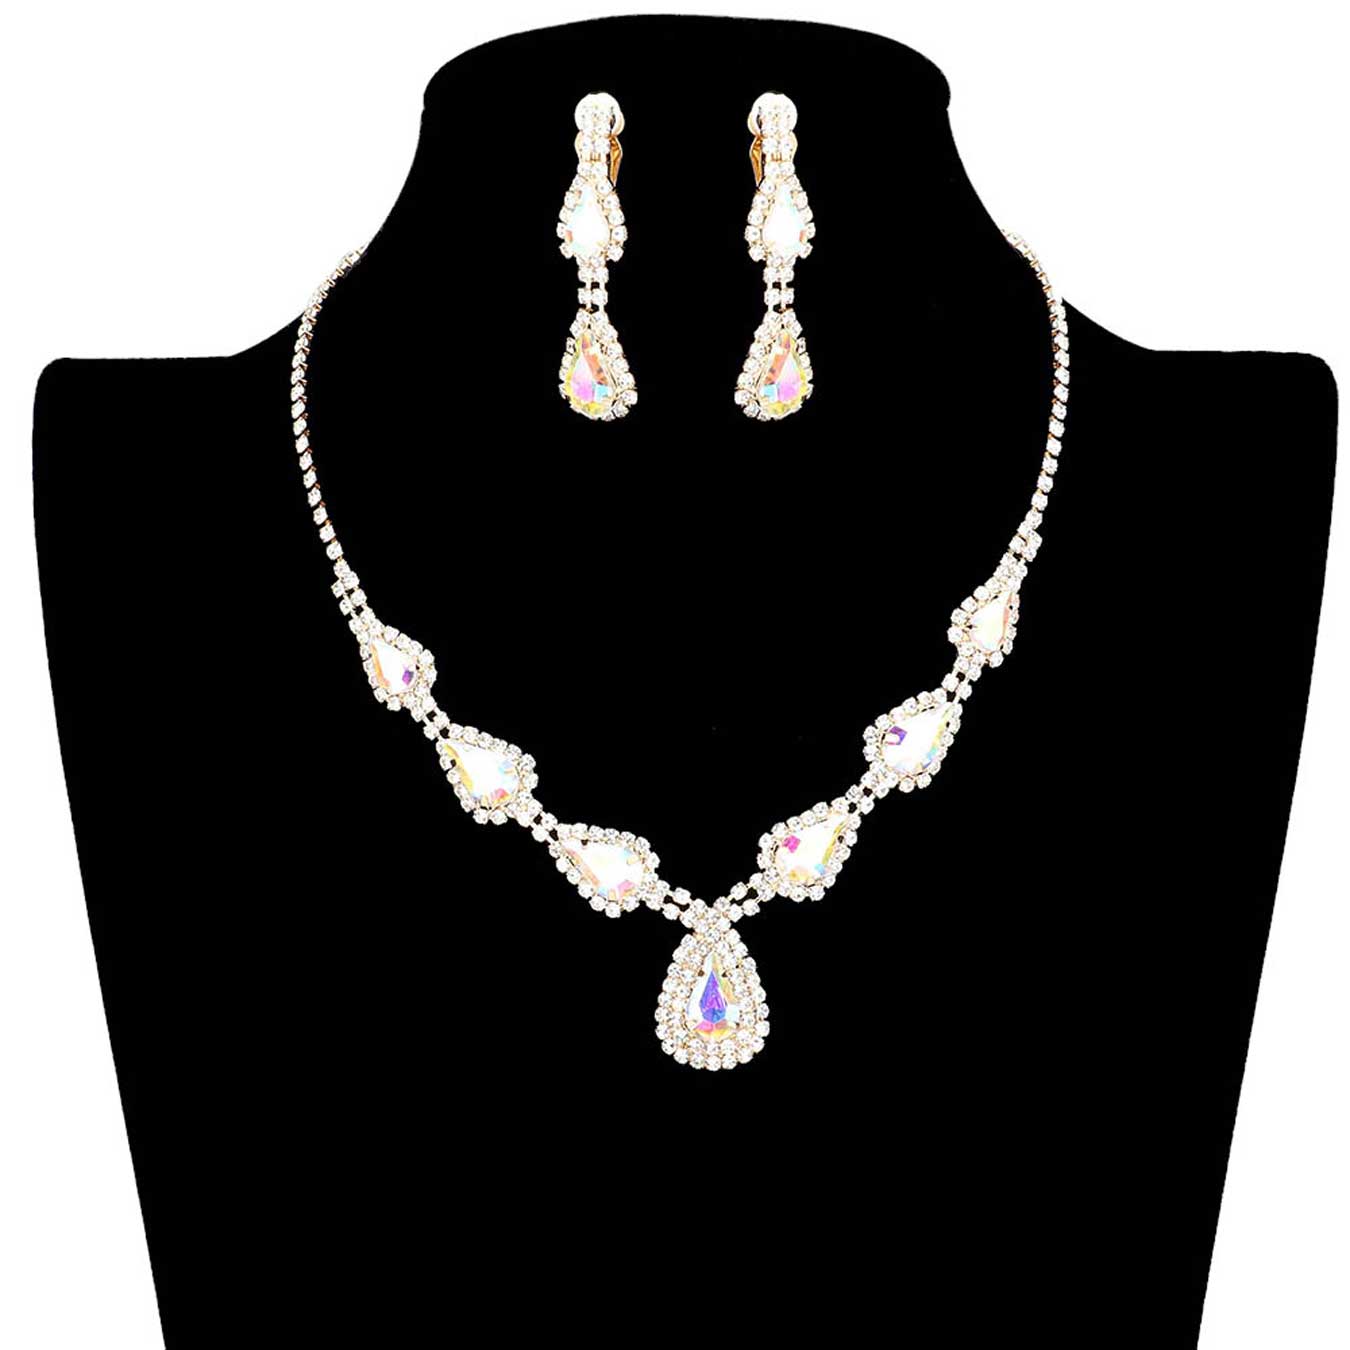 AB Gold Teardrop Stone Accented Rhinestone Pave Necklace, brings a gorgeous glow to your outfit to show off the royalty on any special occasion. These gorgeous Rhinestone pieces will show your class in any special occasion. The elegance of these Rhinestone goes unmatched, great for wearing at a party! Perfect jewelry to enhance your look. Awesome gift for birthday, Anniversary or any special occasion.